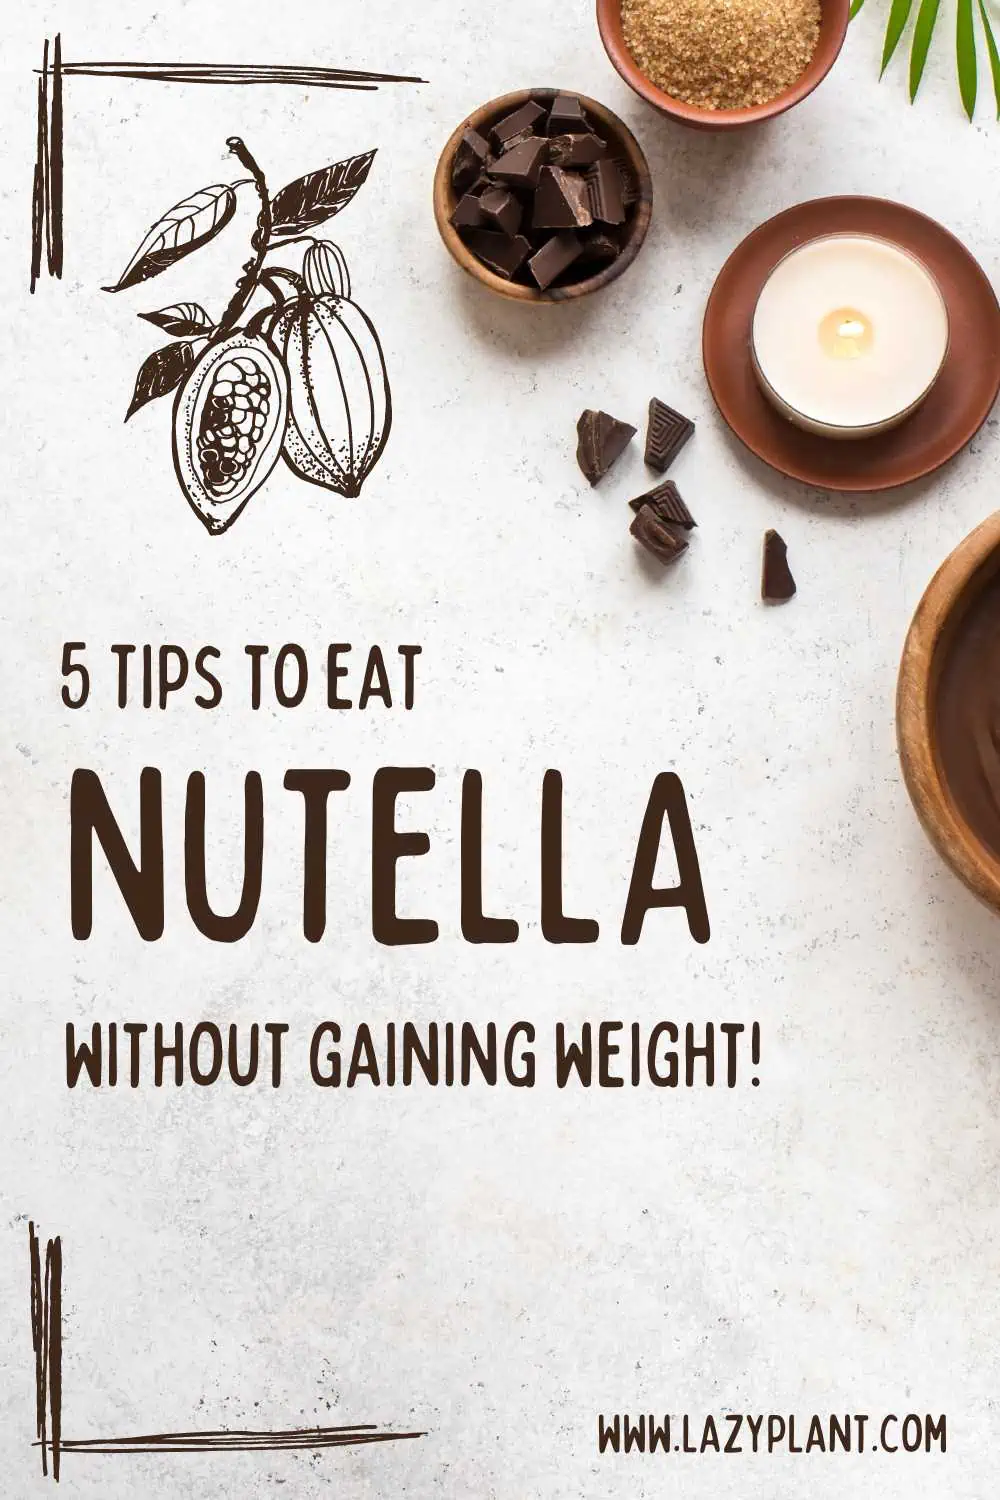 Is it appropriate to include Nutella in one's diet while trying to lose weight?